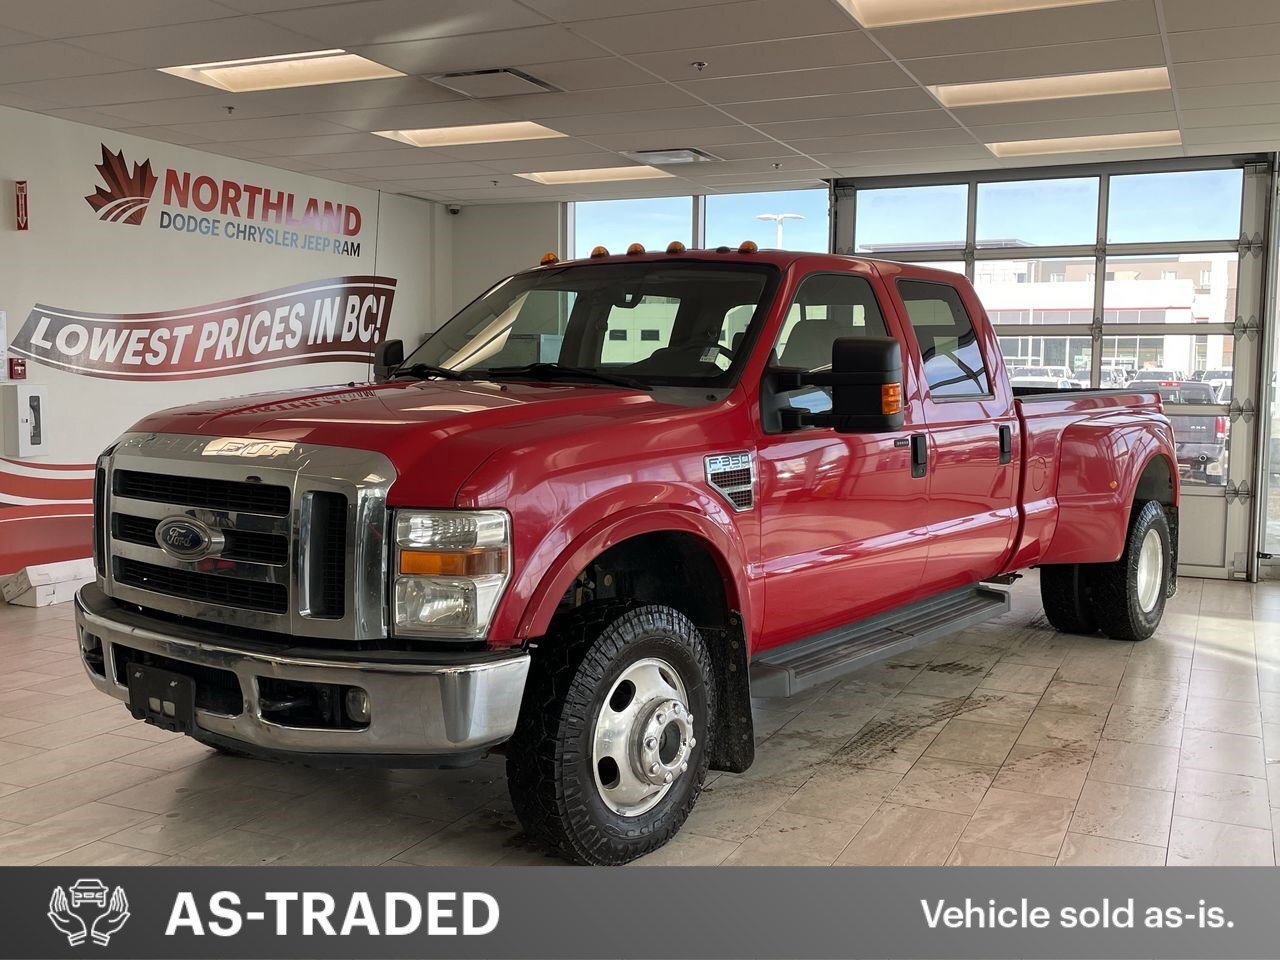 2008 Ford F-350 Lariat | 4WD | Diesel |Long Box | Leather | Tow | 